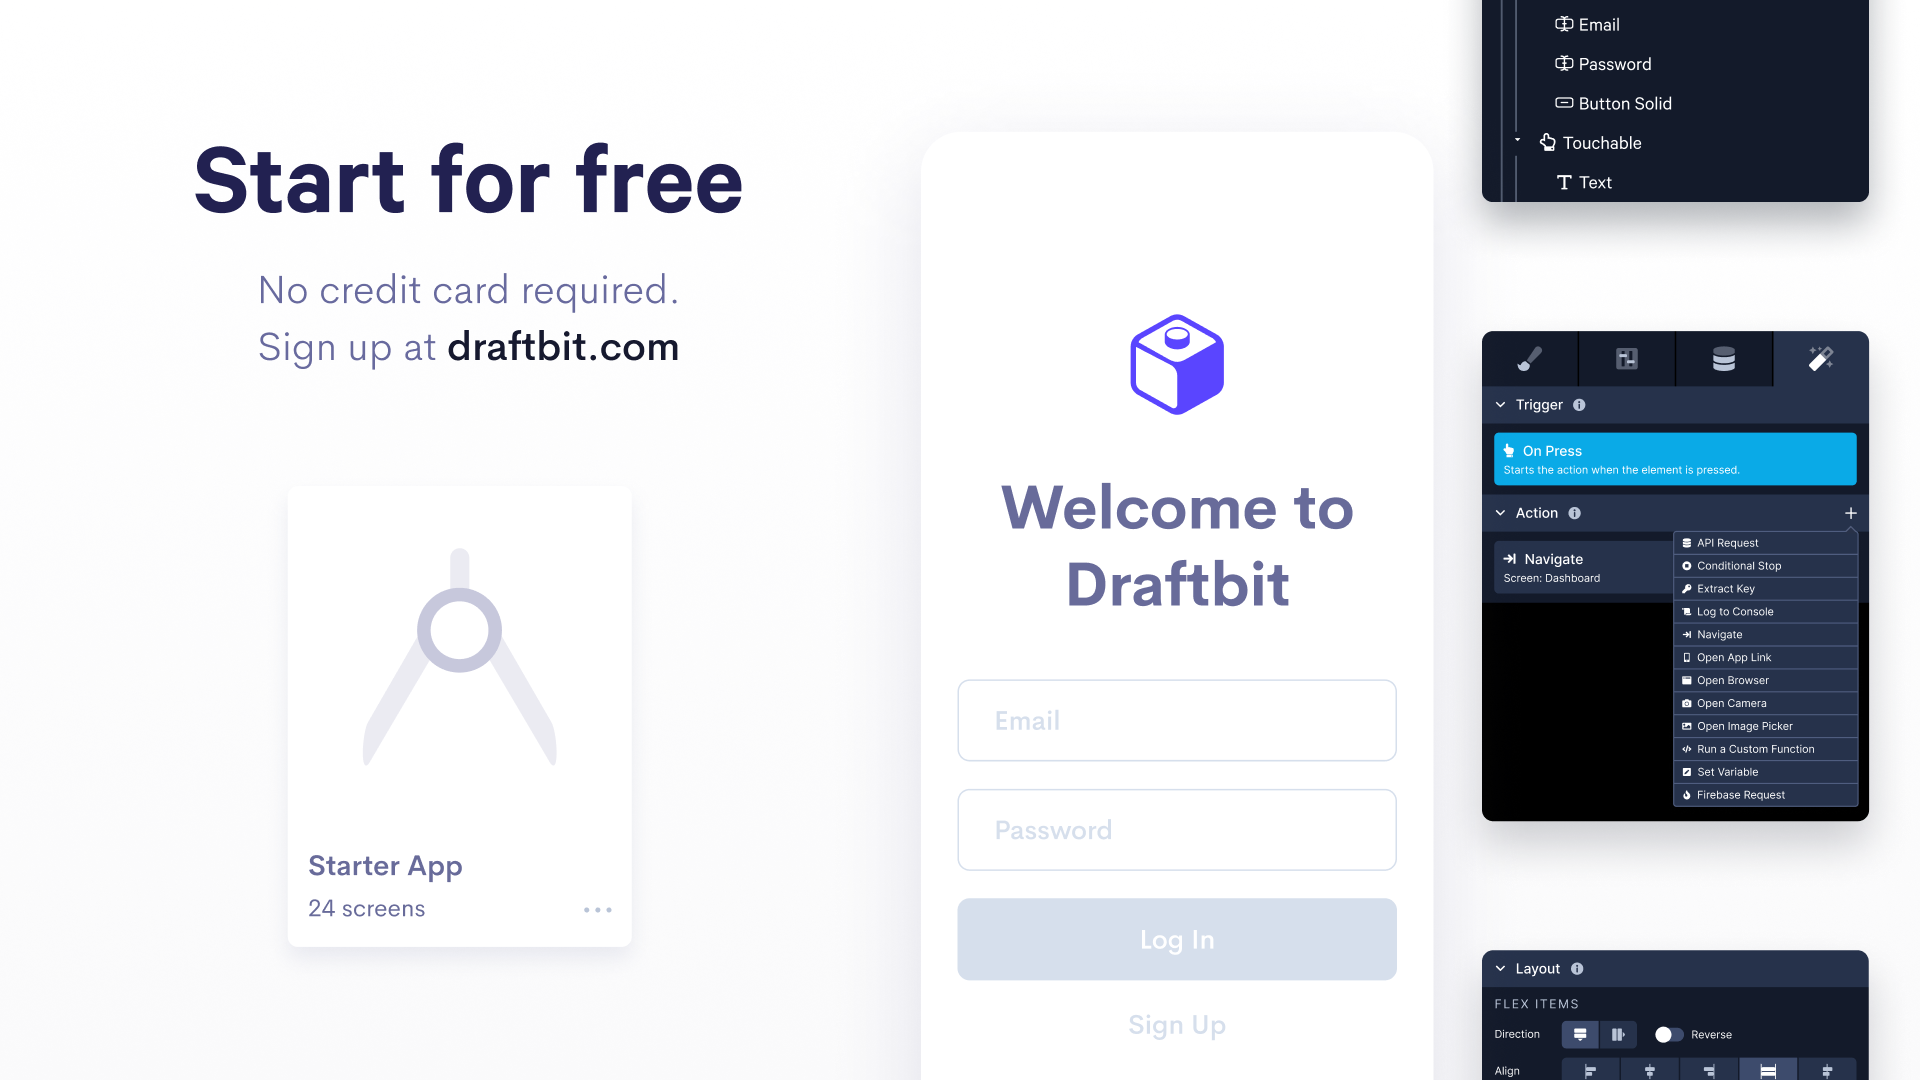 Draftbit Software - Draftbit is free to start, no credit card required.